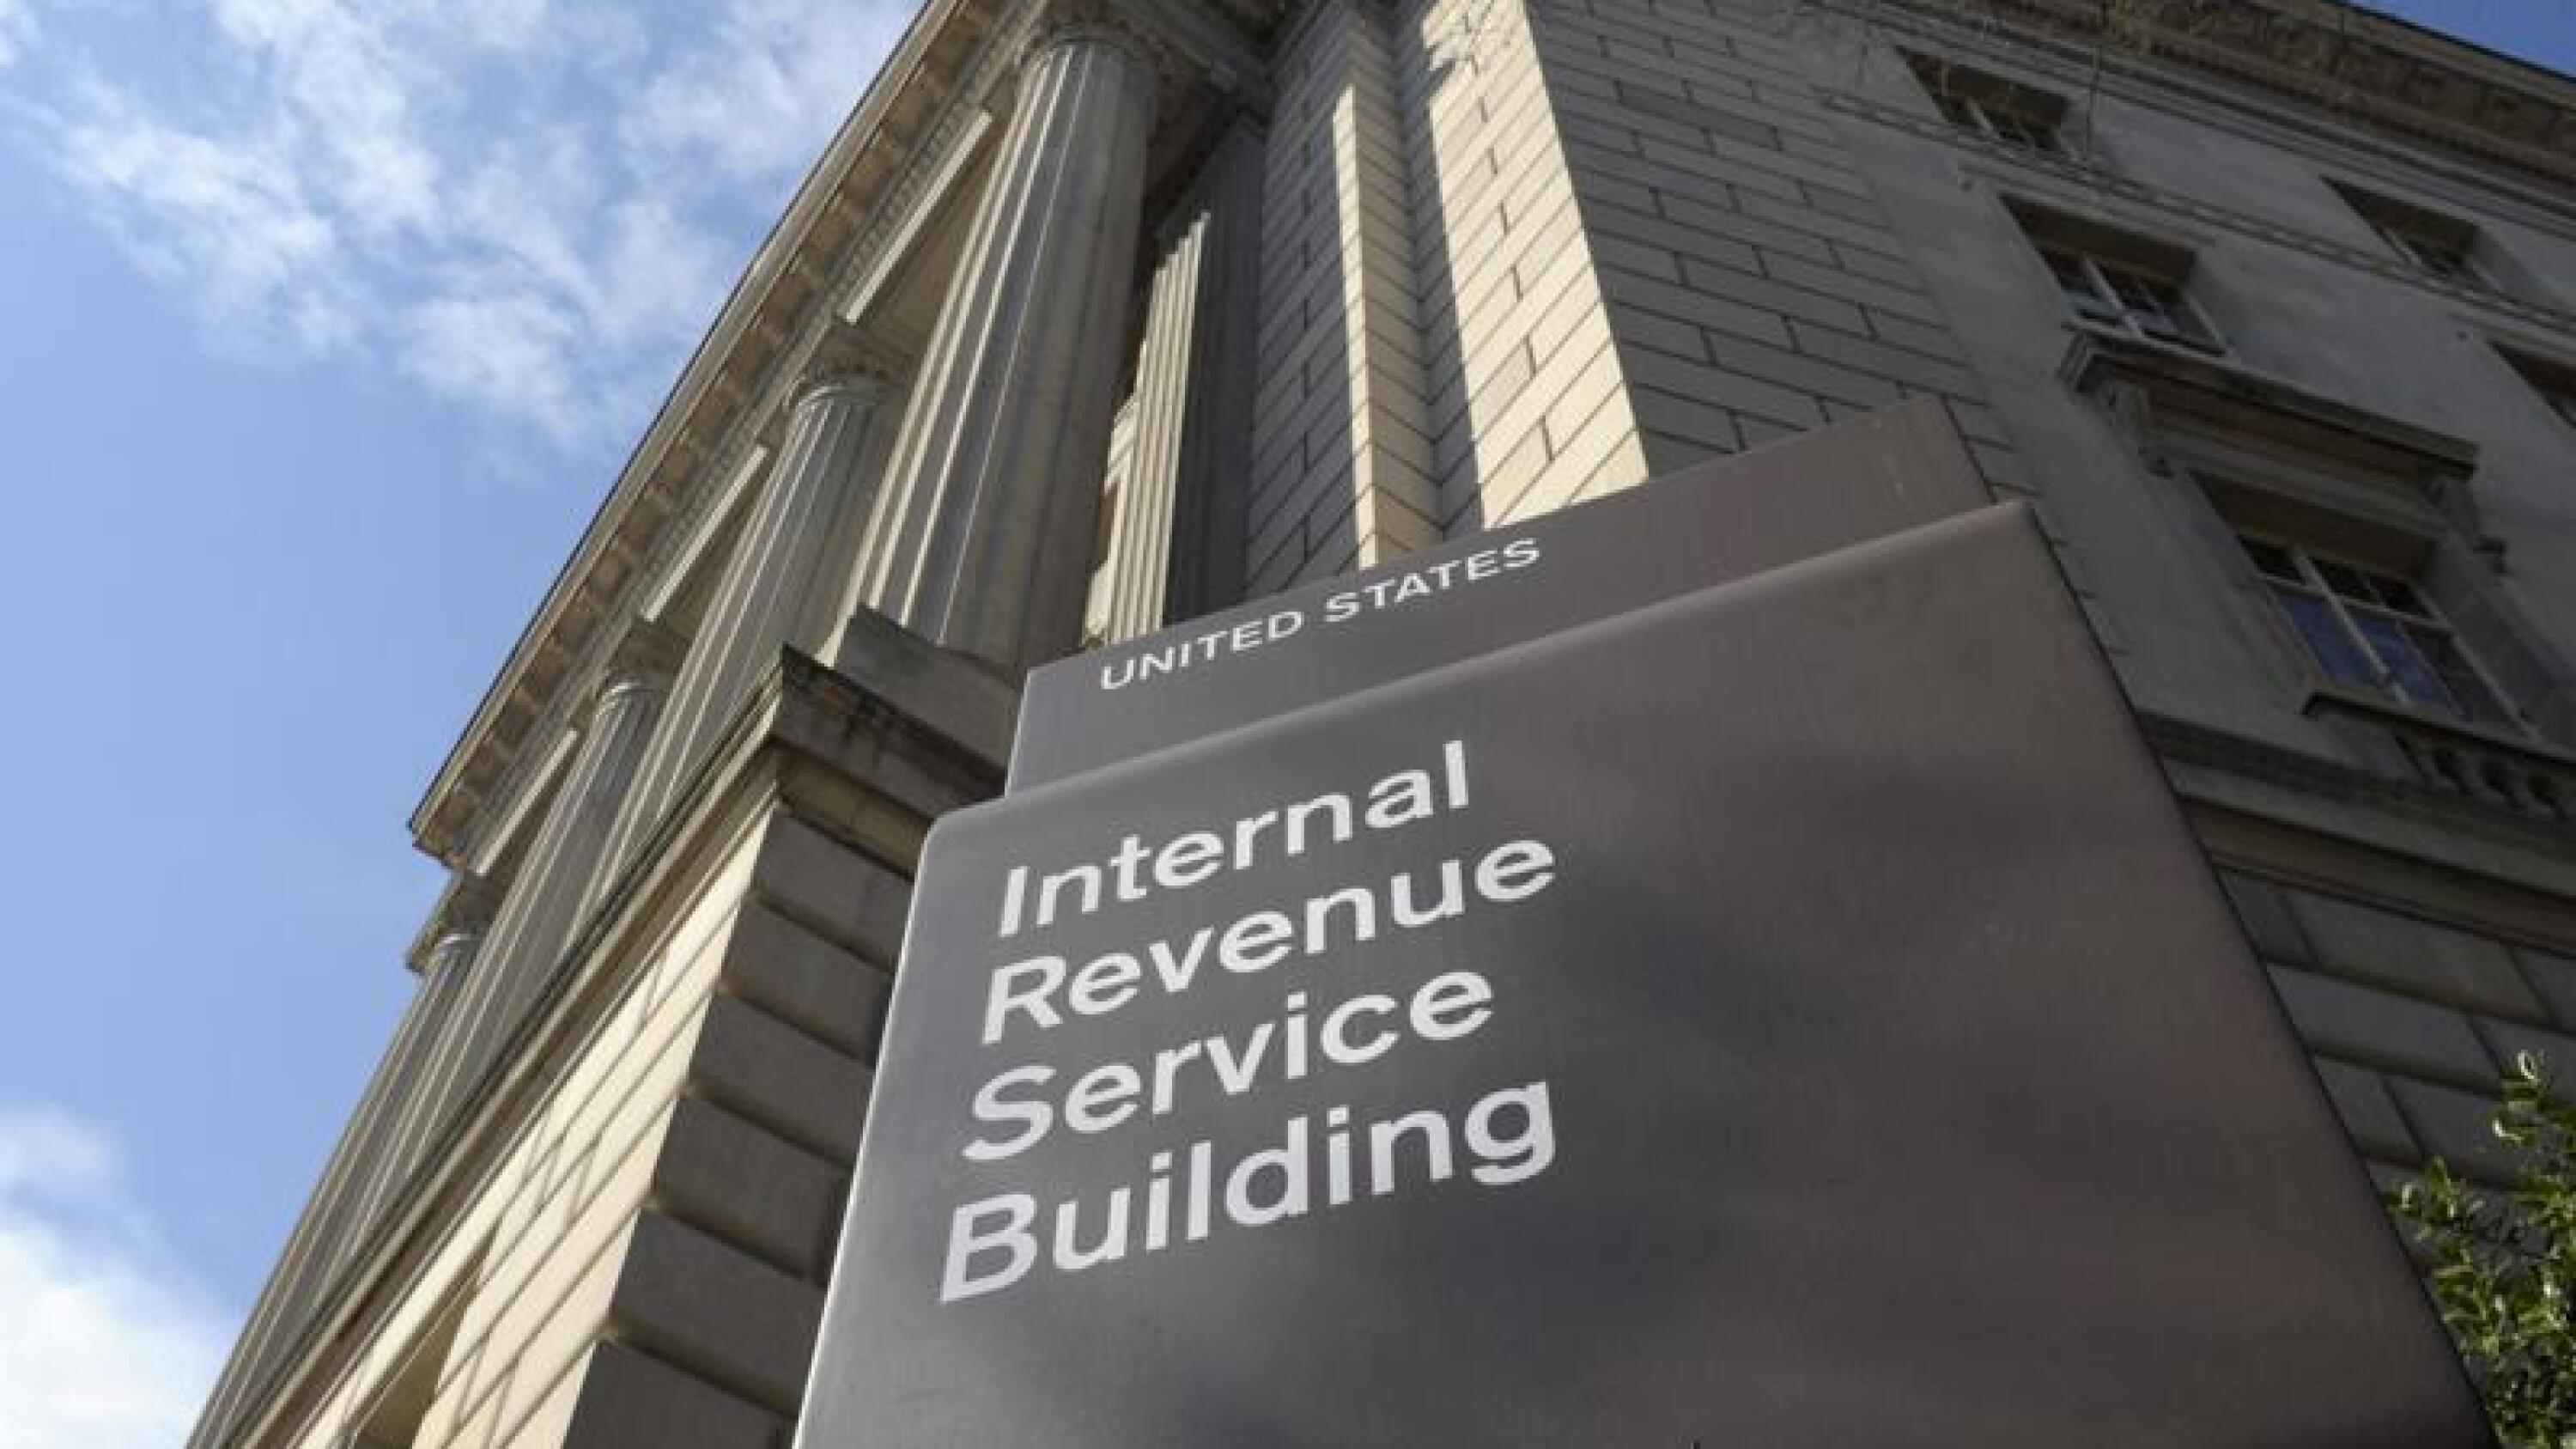 Average income tax refund climbs to $3,011